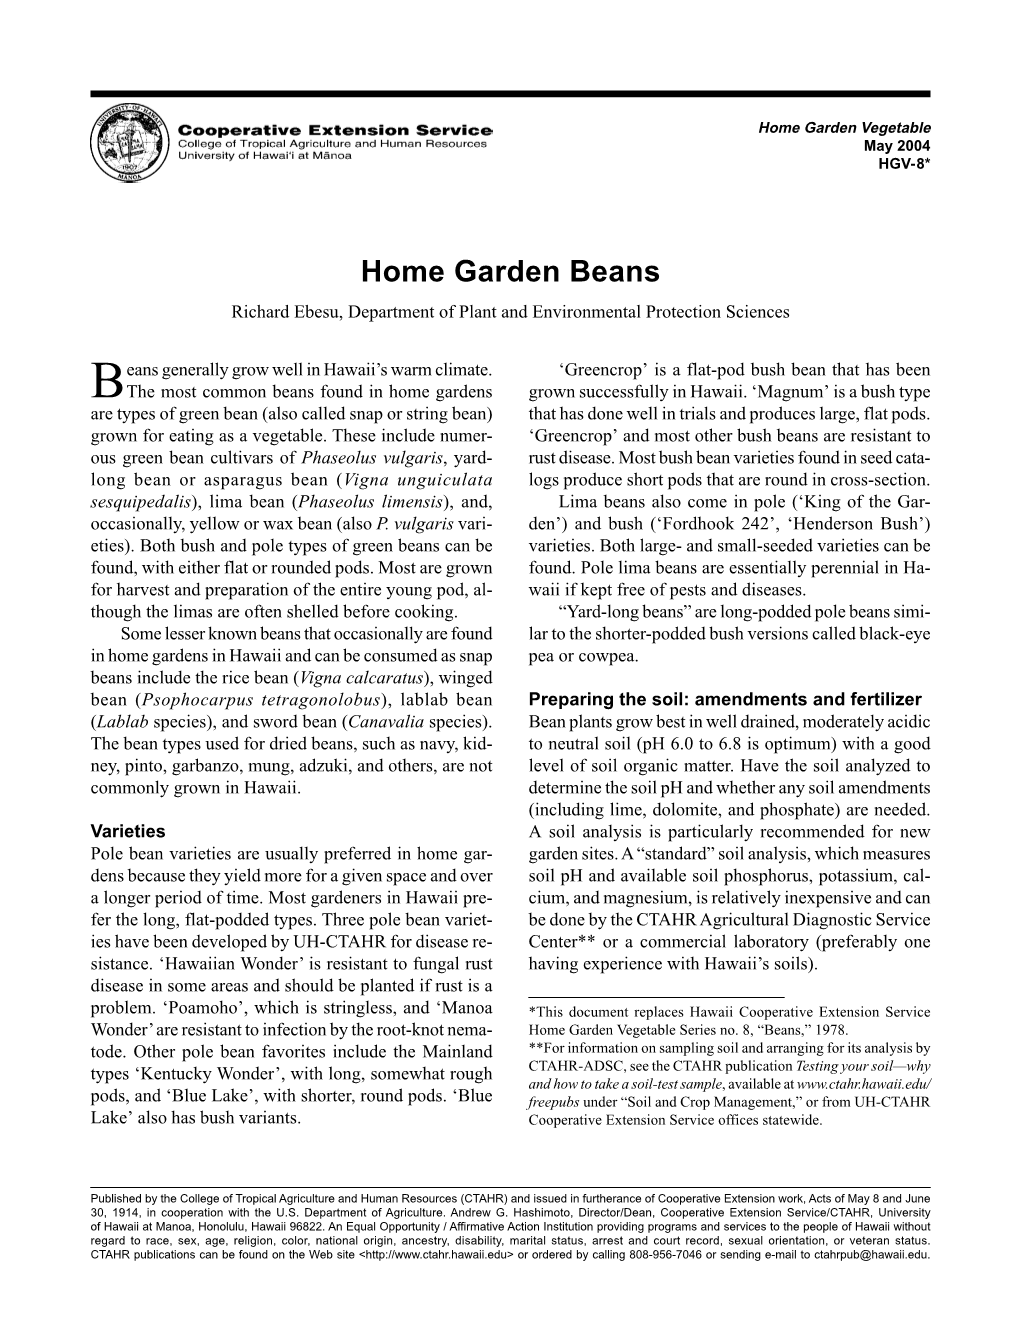 Home Garden Beans Richard Ebesu, Department of Plant and Environmental Protection Sciences